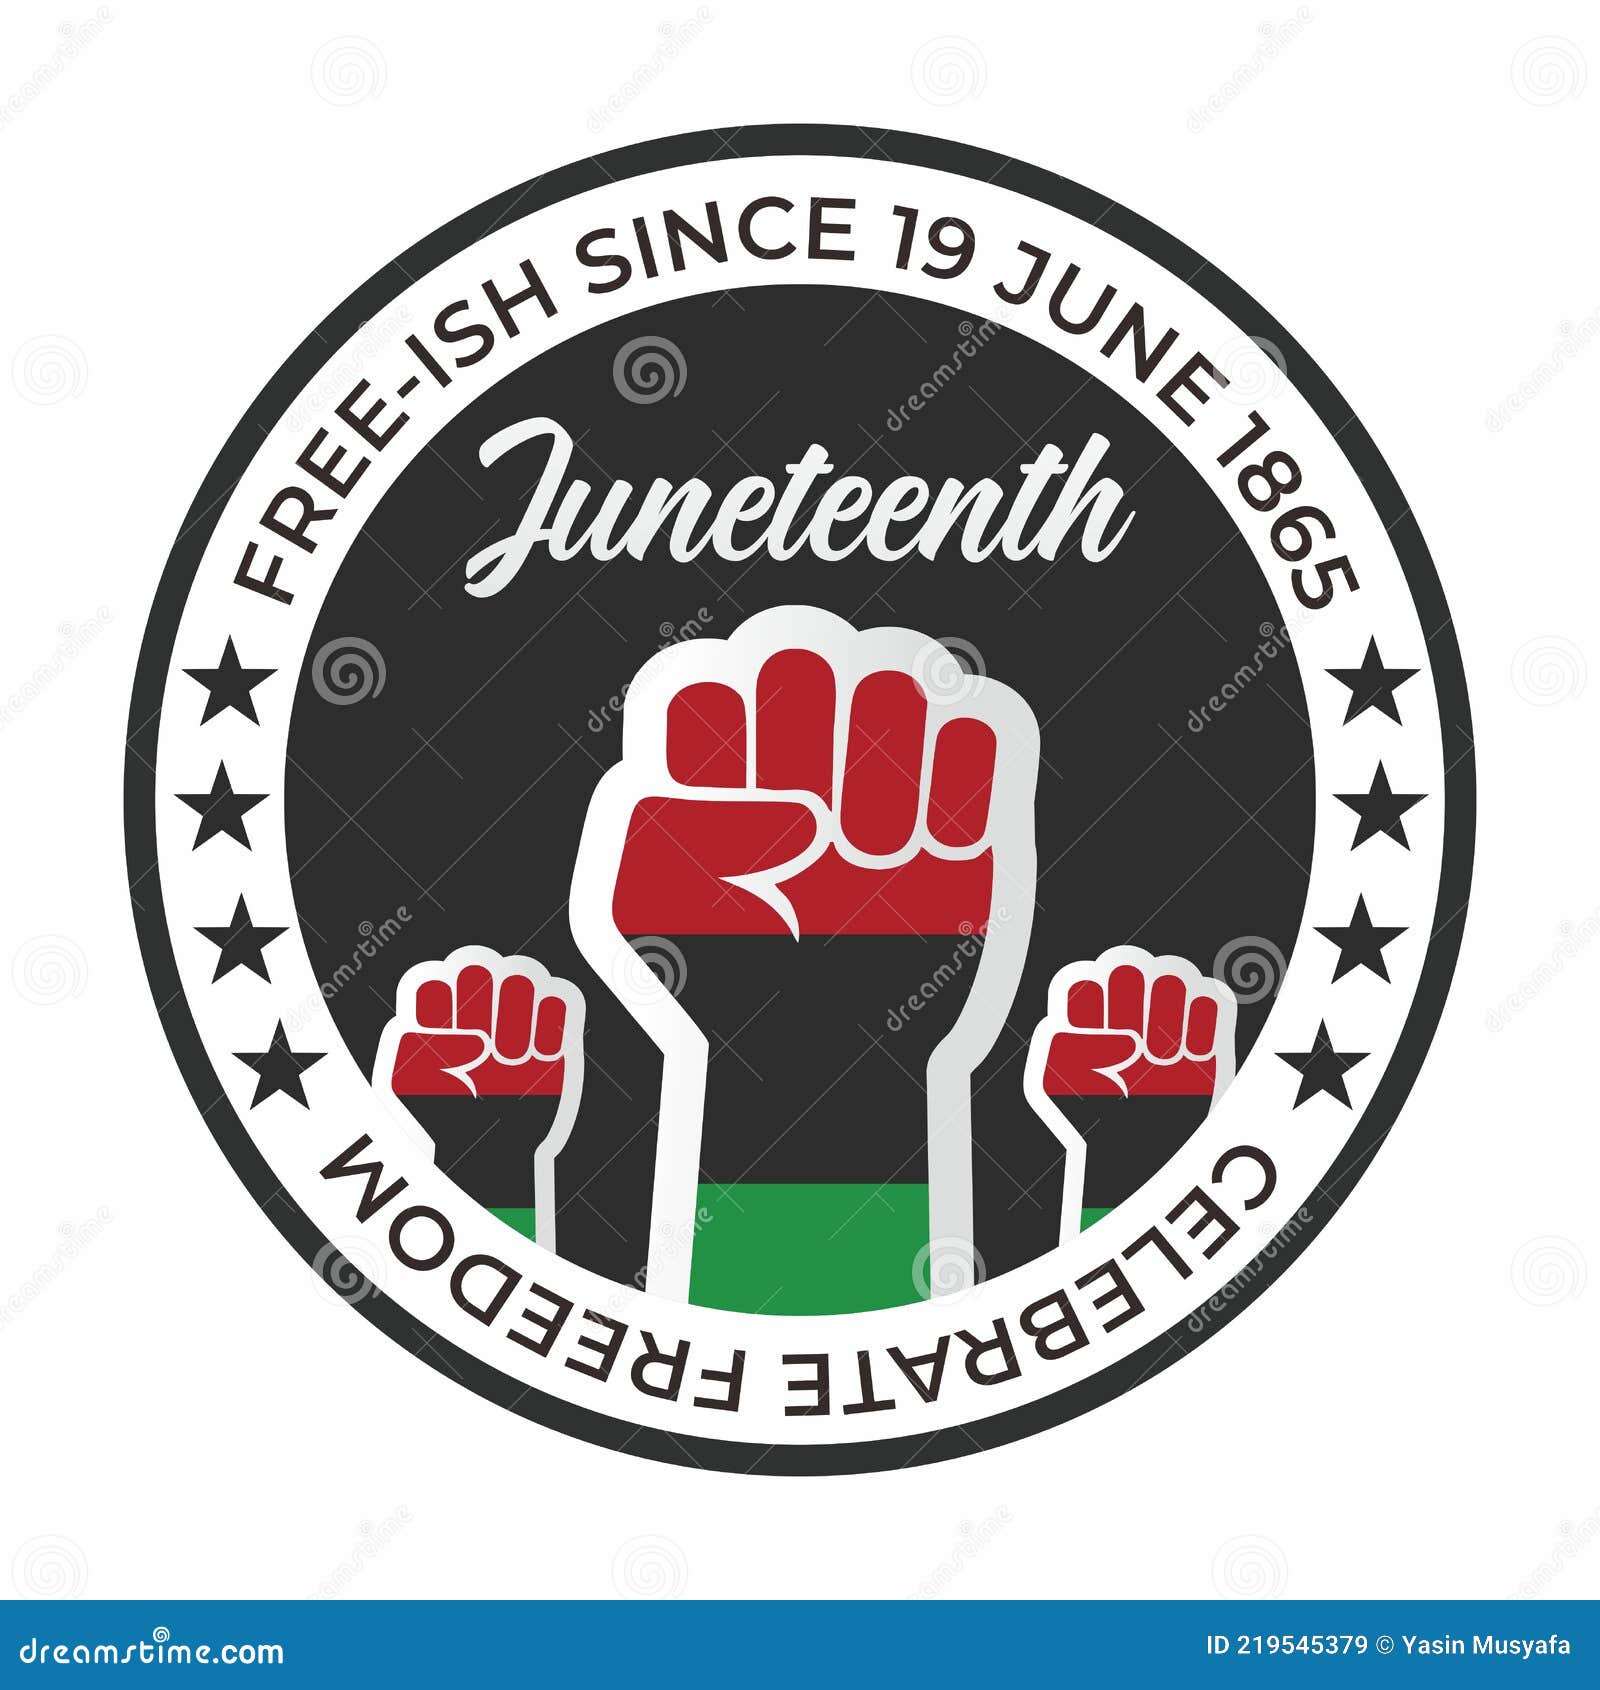 juneteenth day, african-american history and heritage.